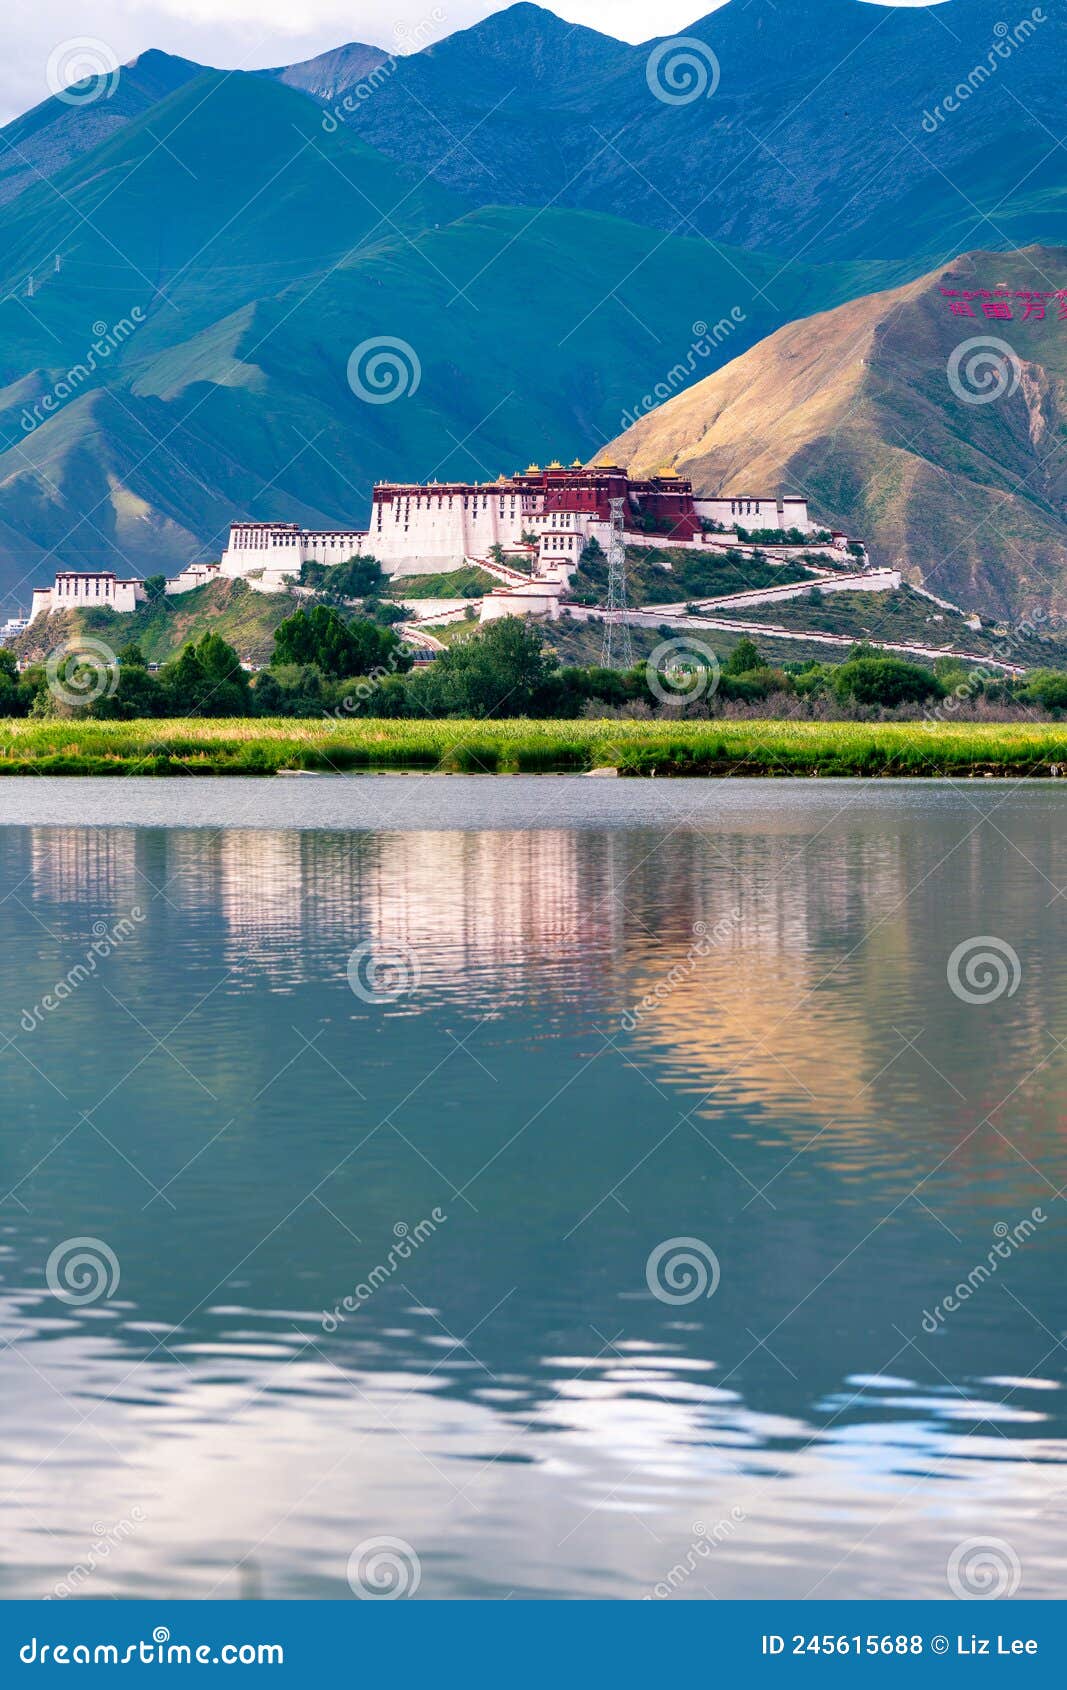 the potala palace, the holy place of tibetan buddhism by lake